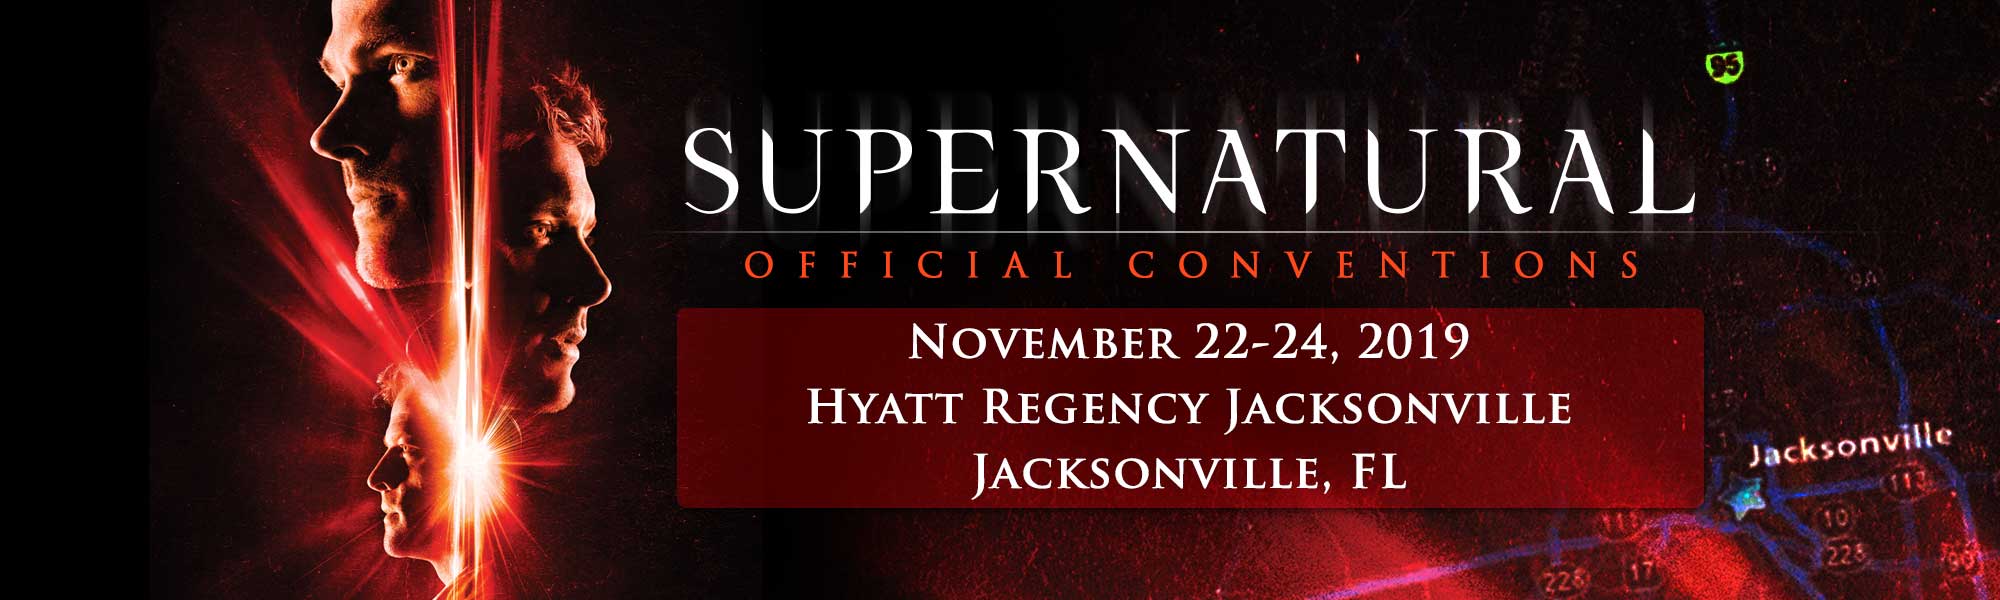 Creation Entertainment's Supernatural Offical Convention in